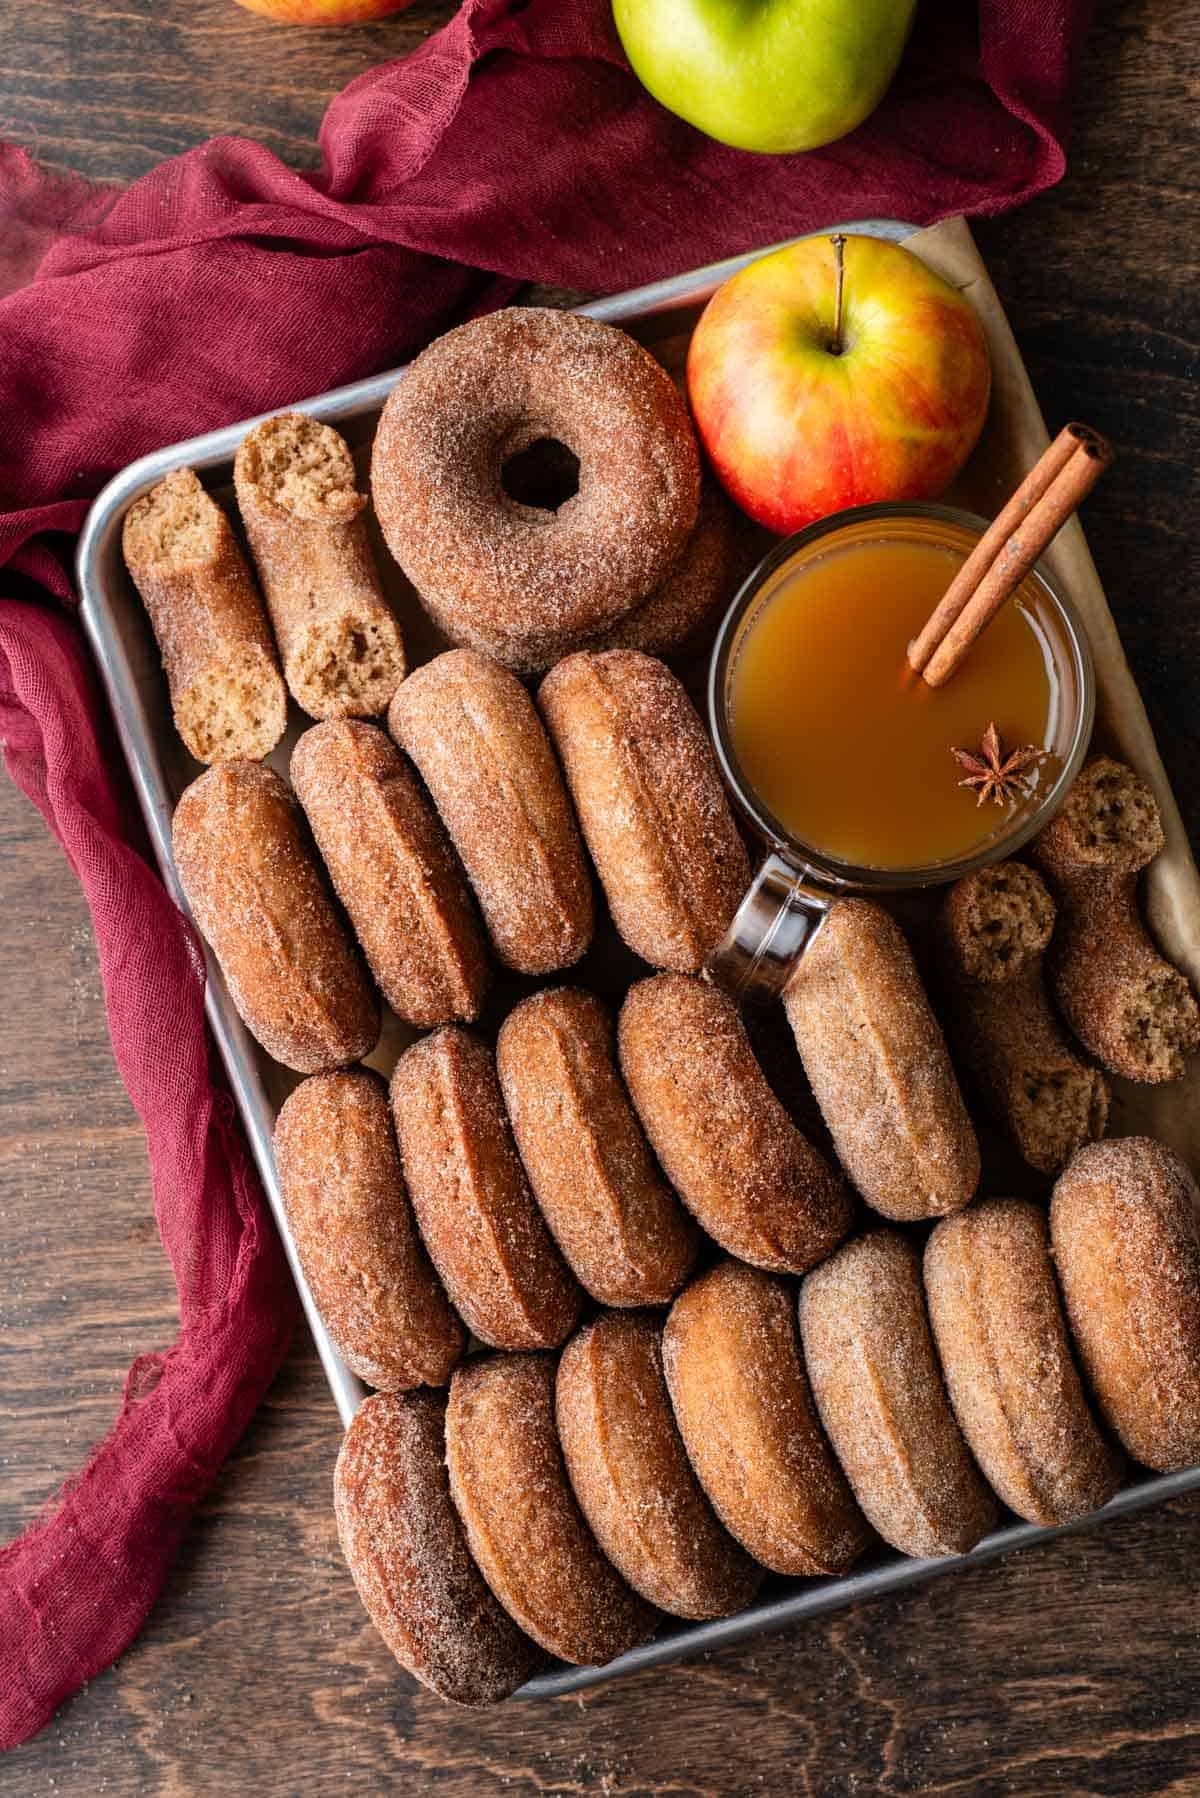 a sheet pan full of apple cider donuts, some lined up on their sides, some stacked and some in halves, with a glass of apple cider with a cinnamon stick in it, and a red and yellow apple, on top of a maroon towel with a whole green apple on it